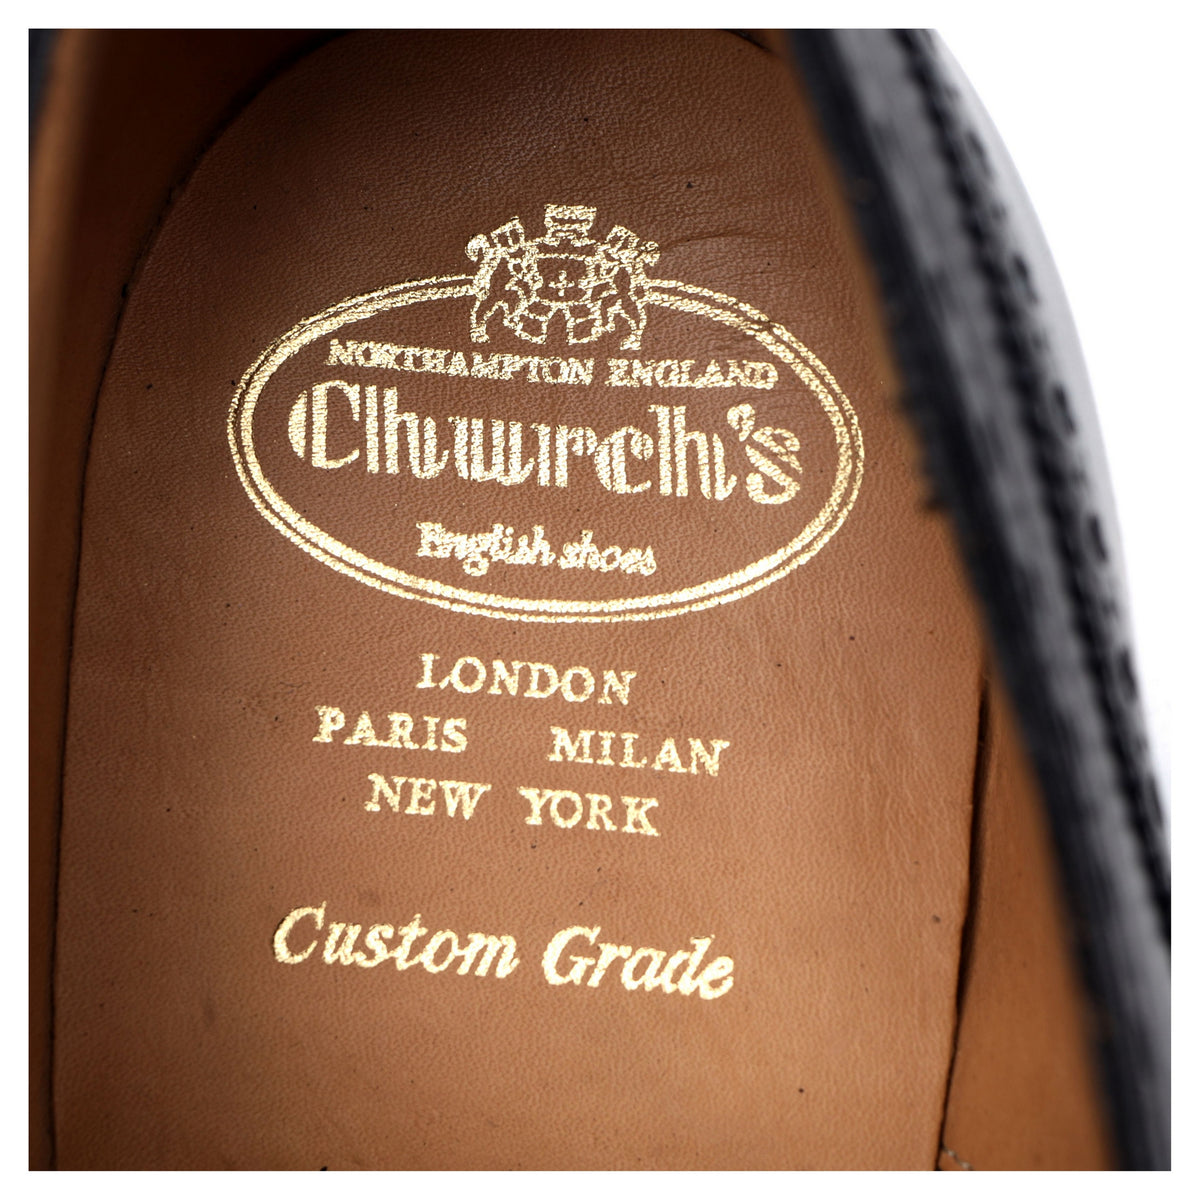 &#39;Chetwynd&#39; Black Leather Oxford Brogues UK 11.5 G